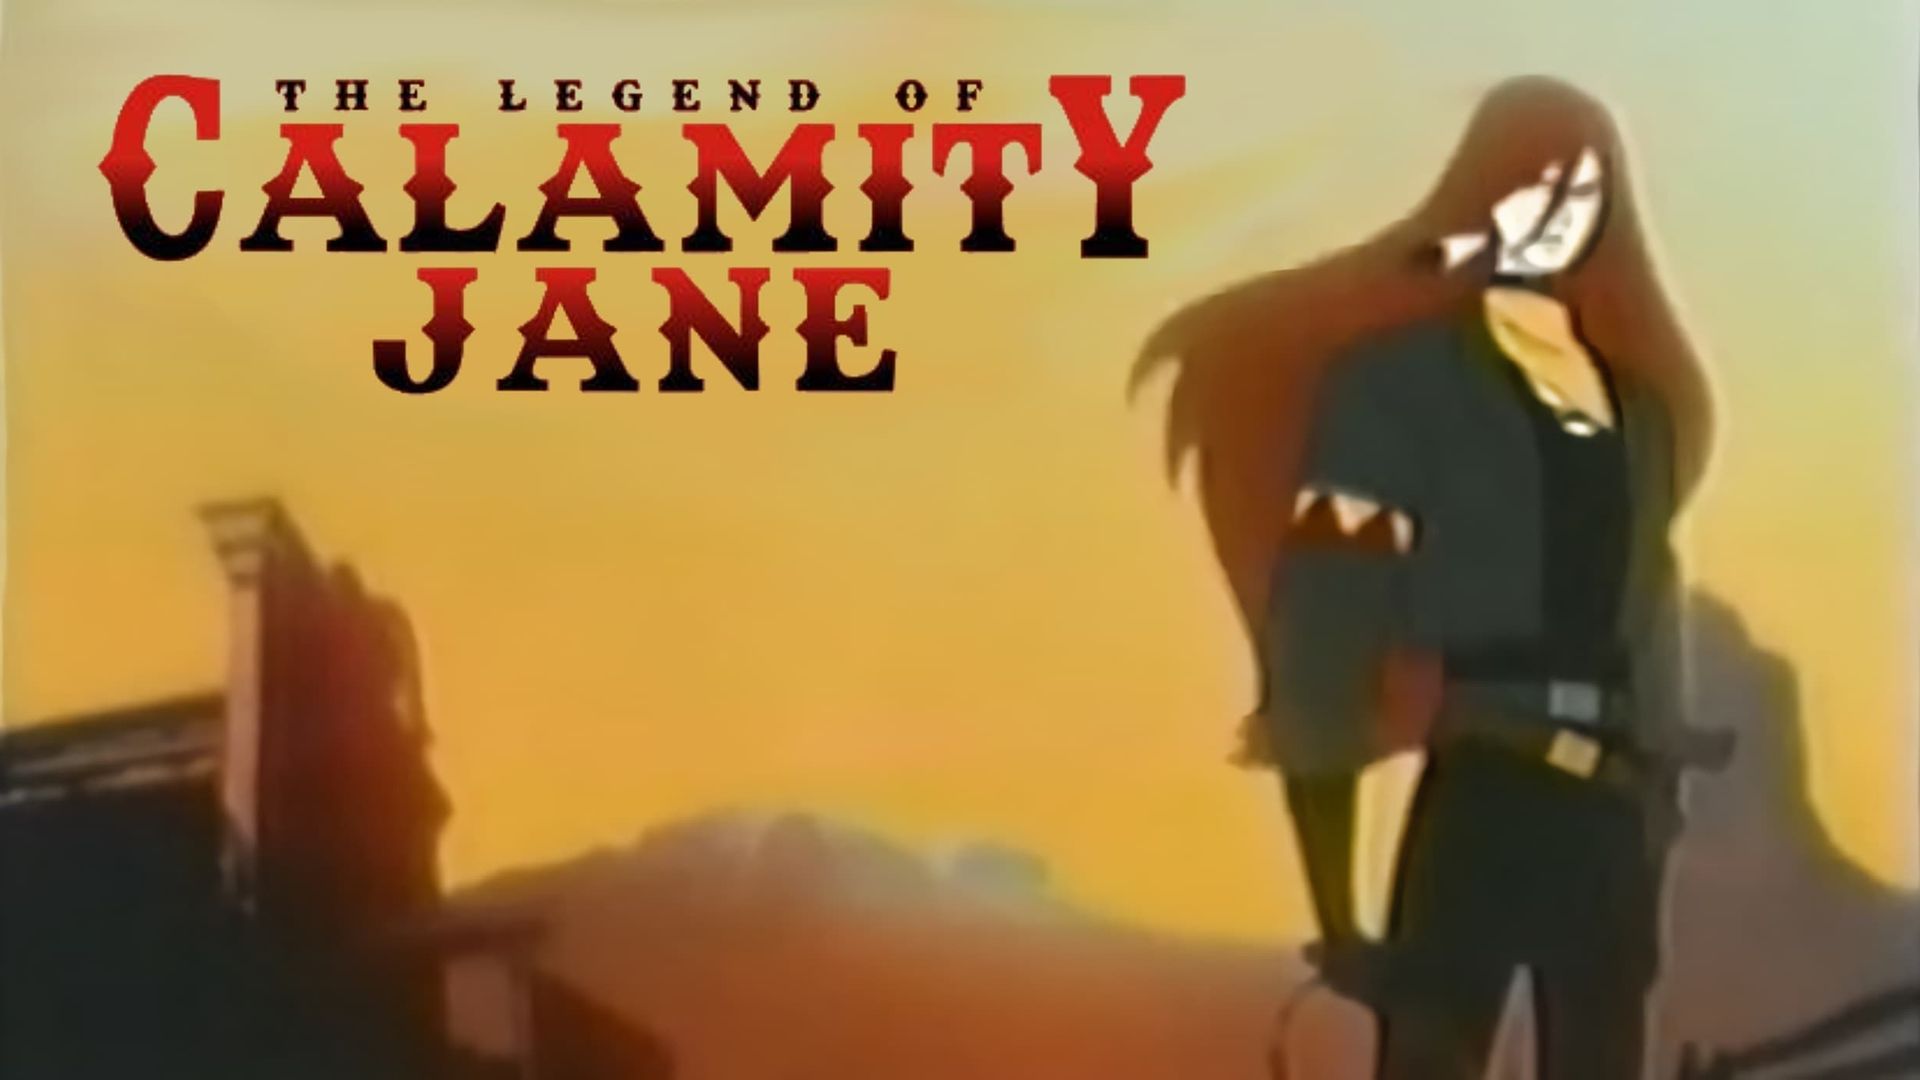 The Legend of Calamity Jane background